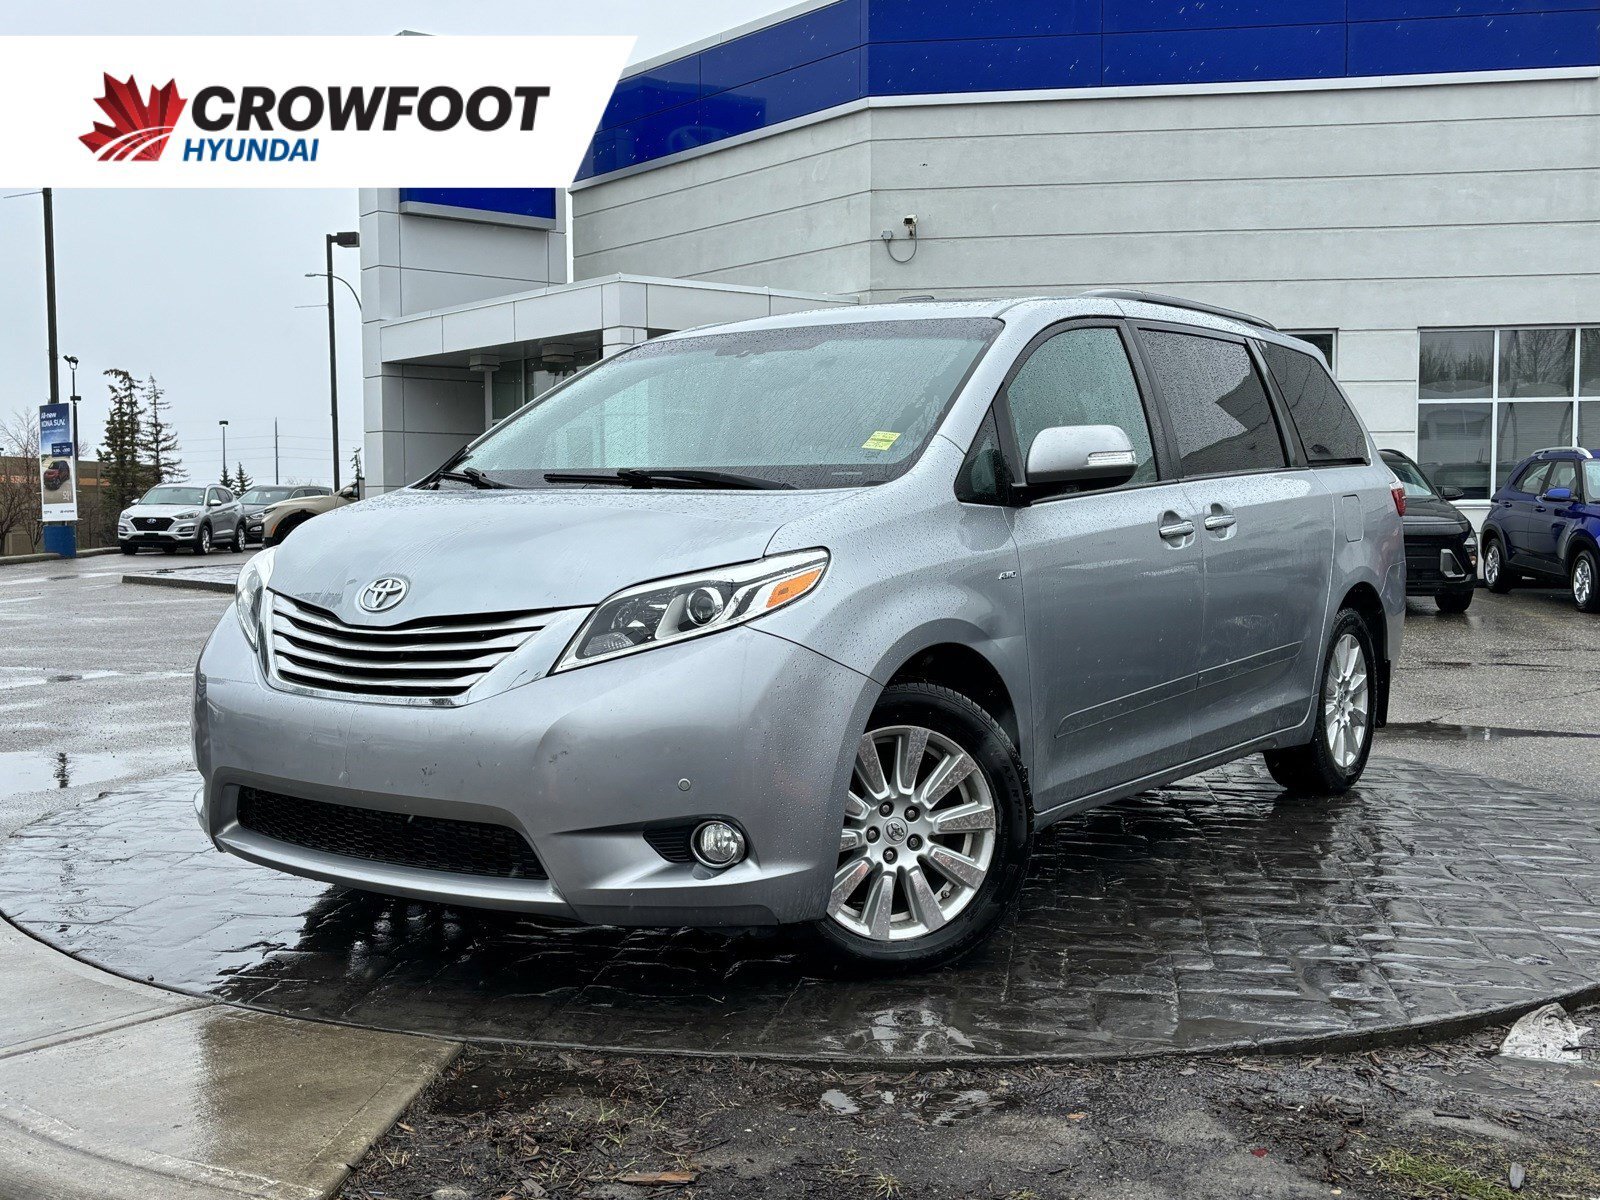 2017 Toyota Sienna XLE - 4WD, 7-Passenger, No Accidents, One Owner, L